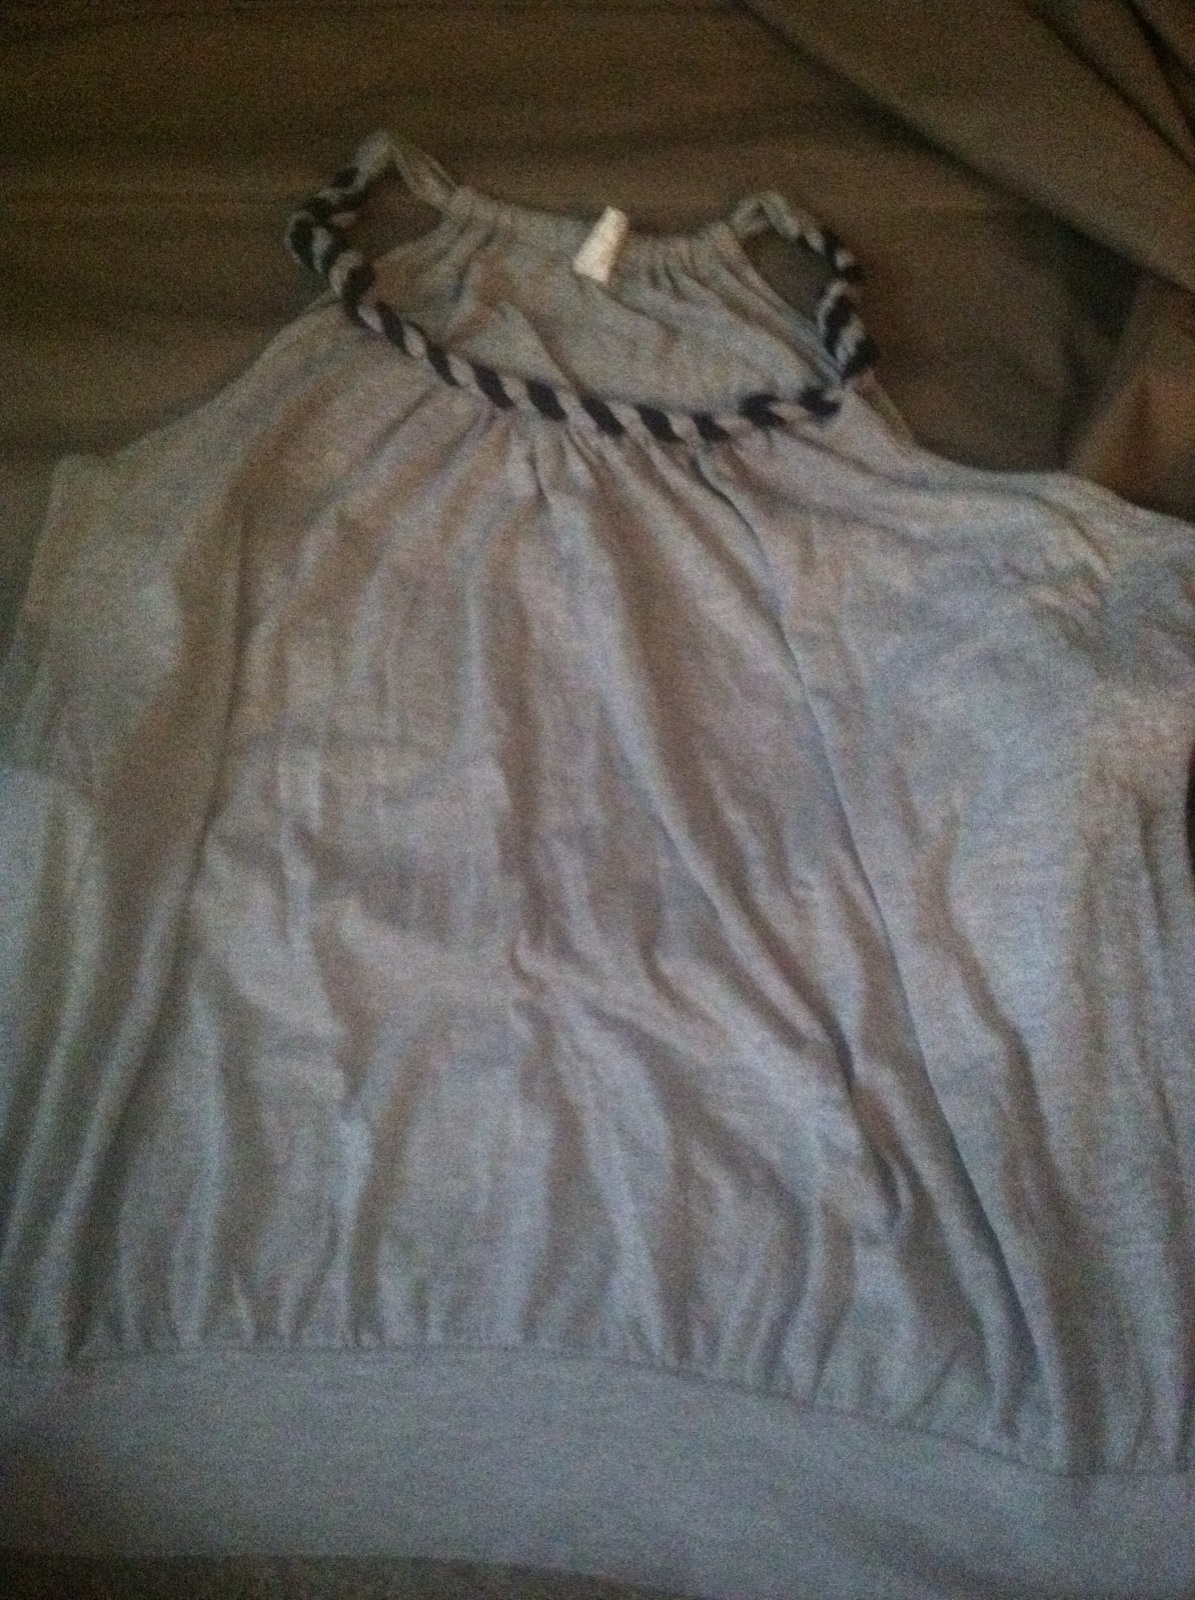 Grey Tank Top in Shelbyam's Garage Sale Sioux Falls, SD